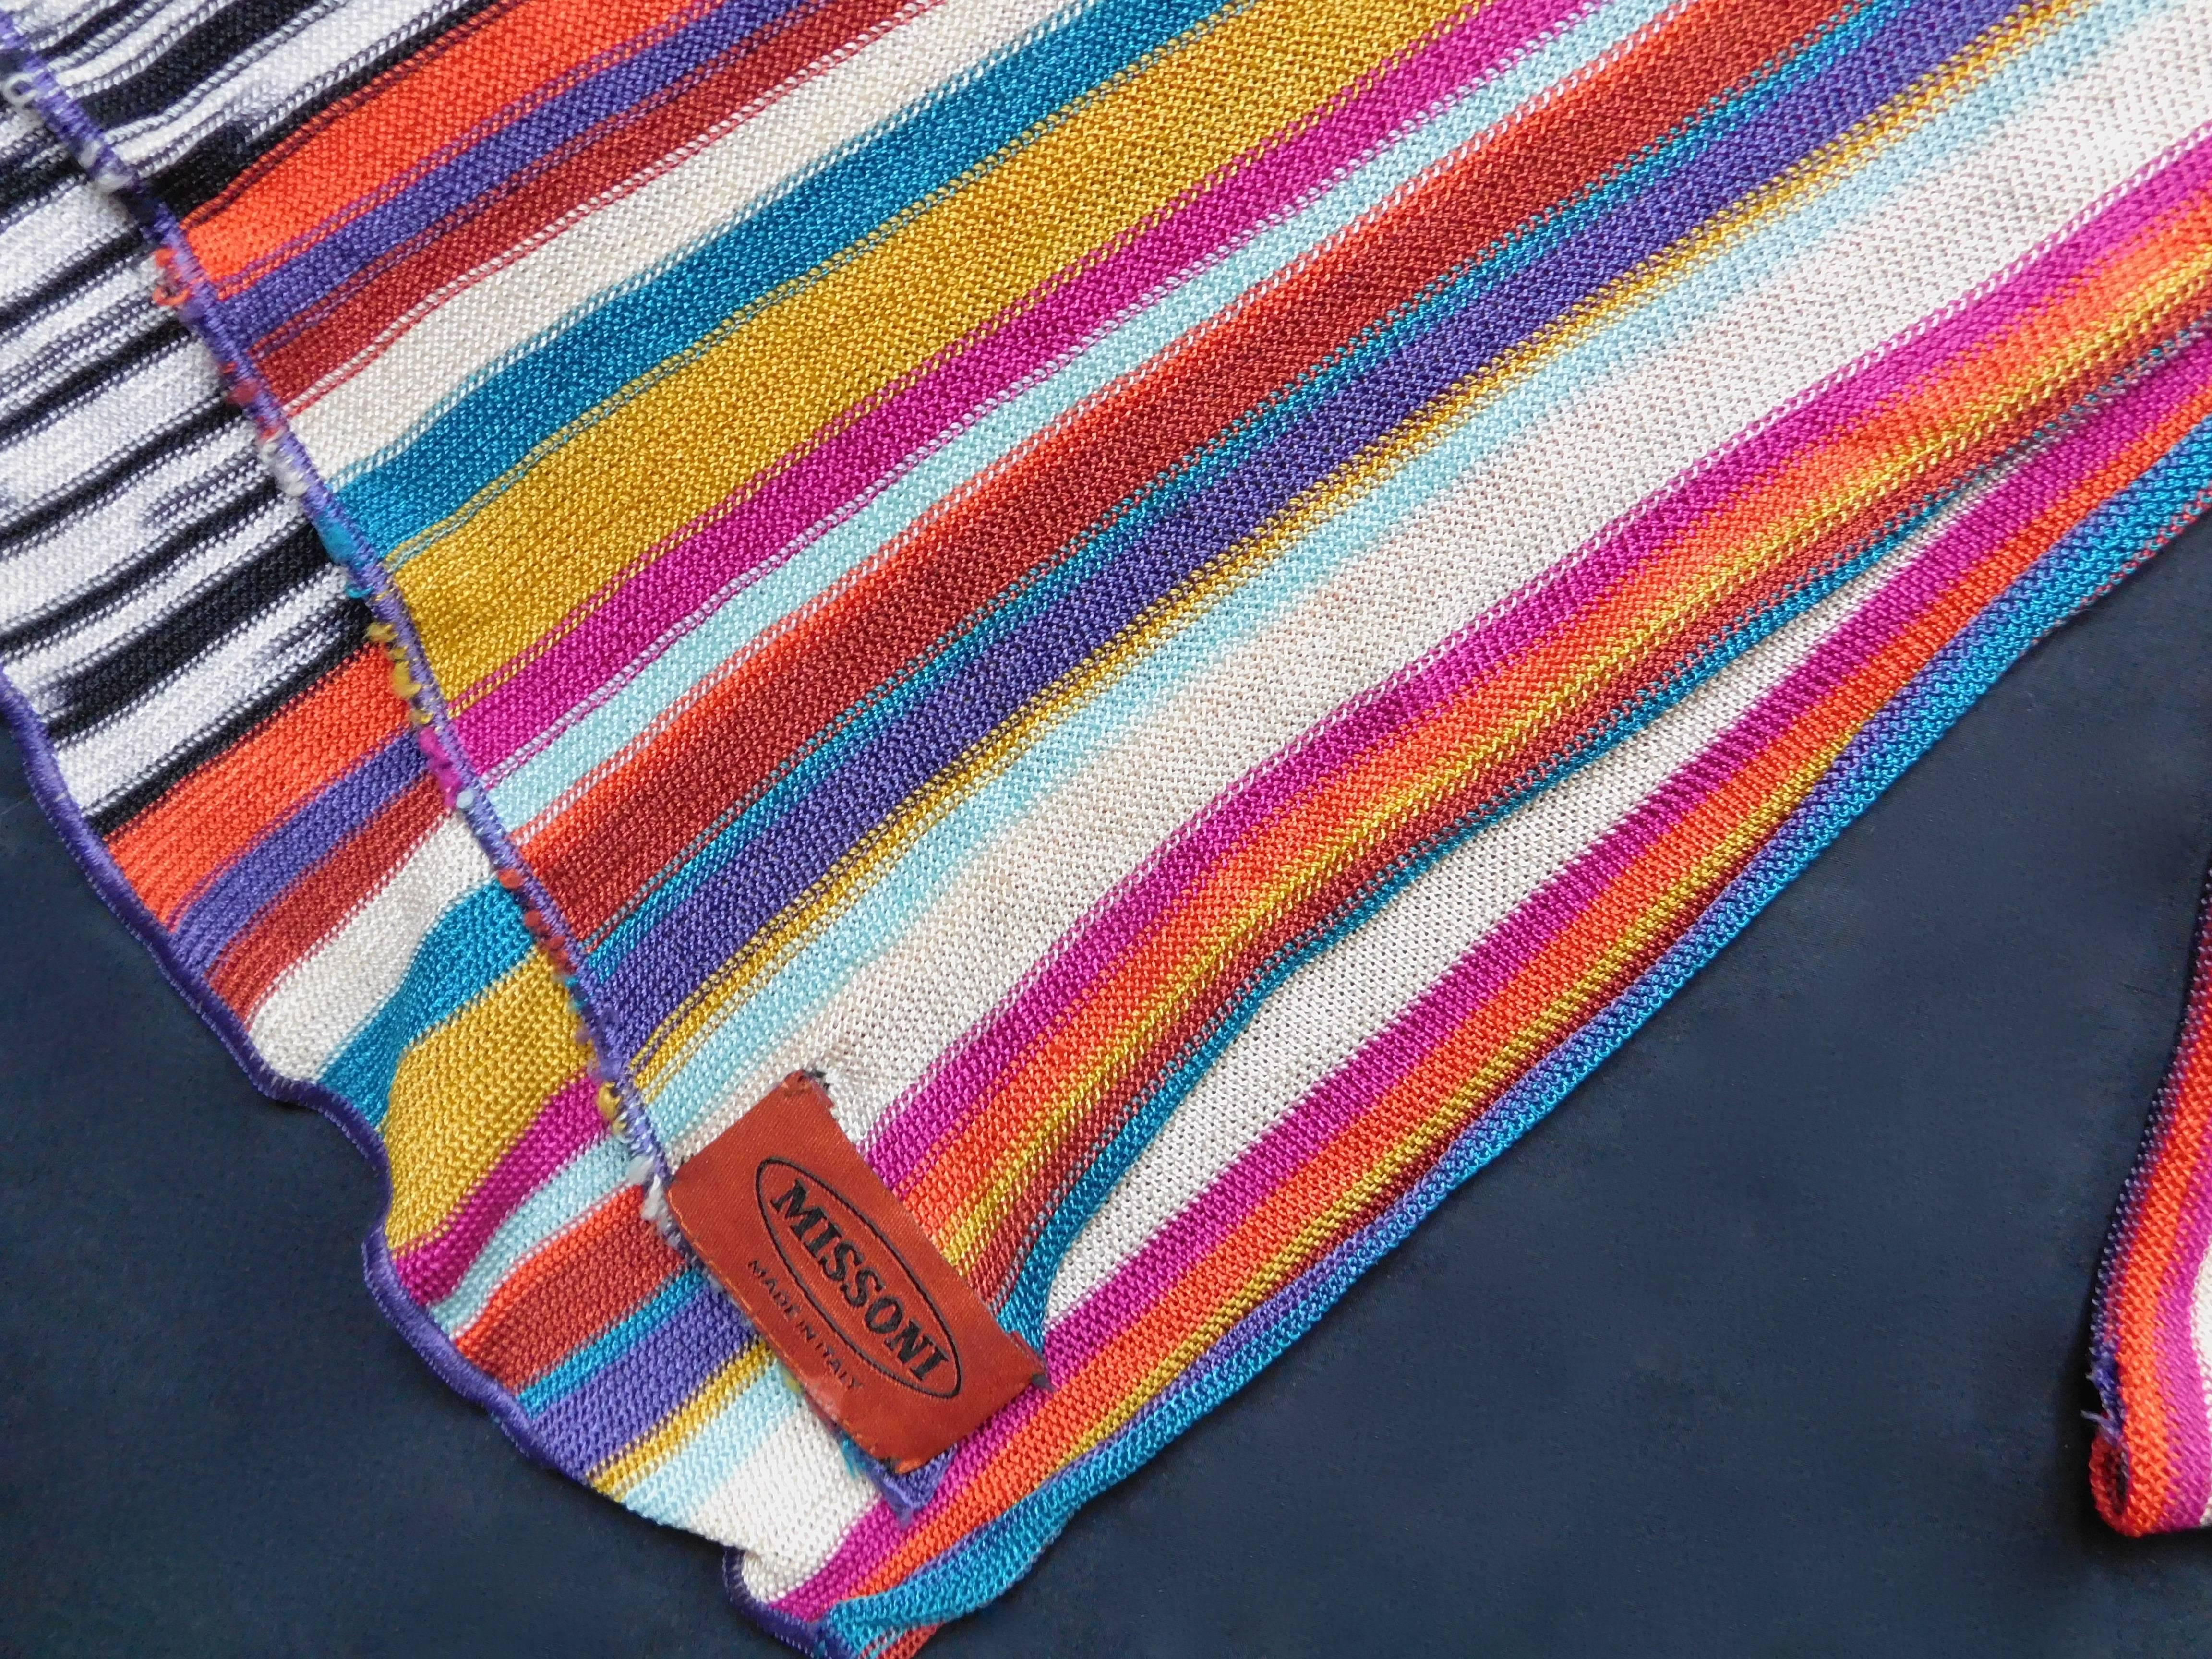 Over 7' long Missoni knitted multicolour silk scarf from the 2003 Collection. Was shown for men and women. A great travel piece as it goes with everything and can be worn as a halter top, sash or bandeau as well as a scarf.